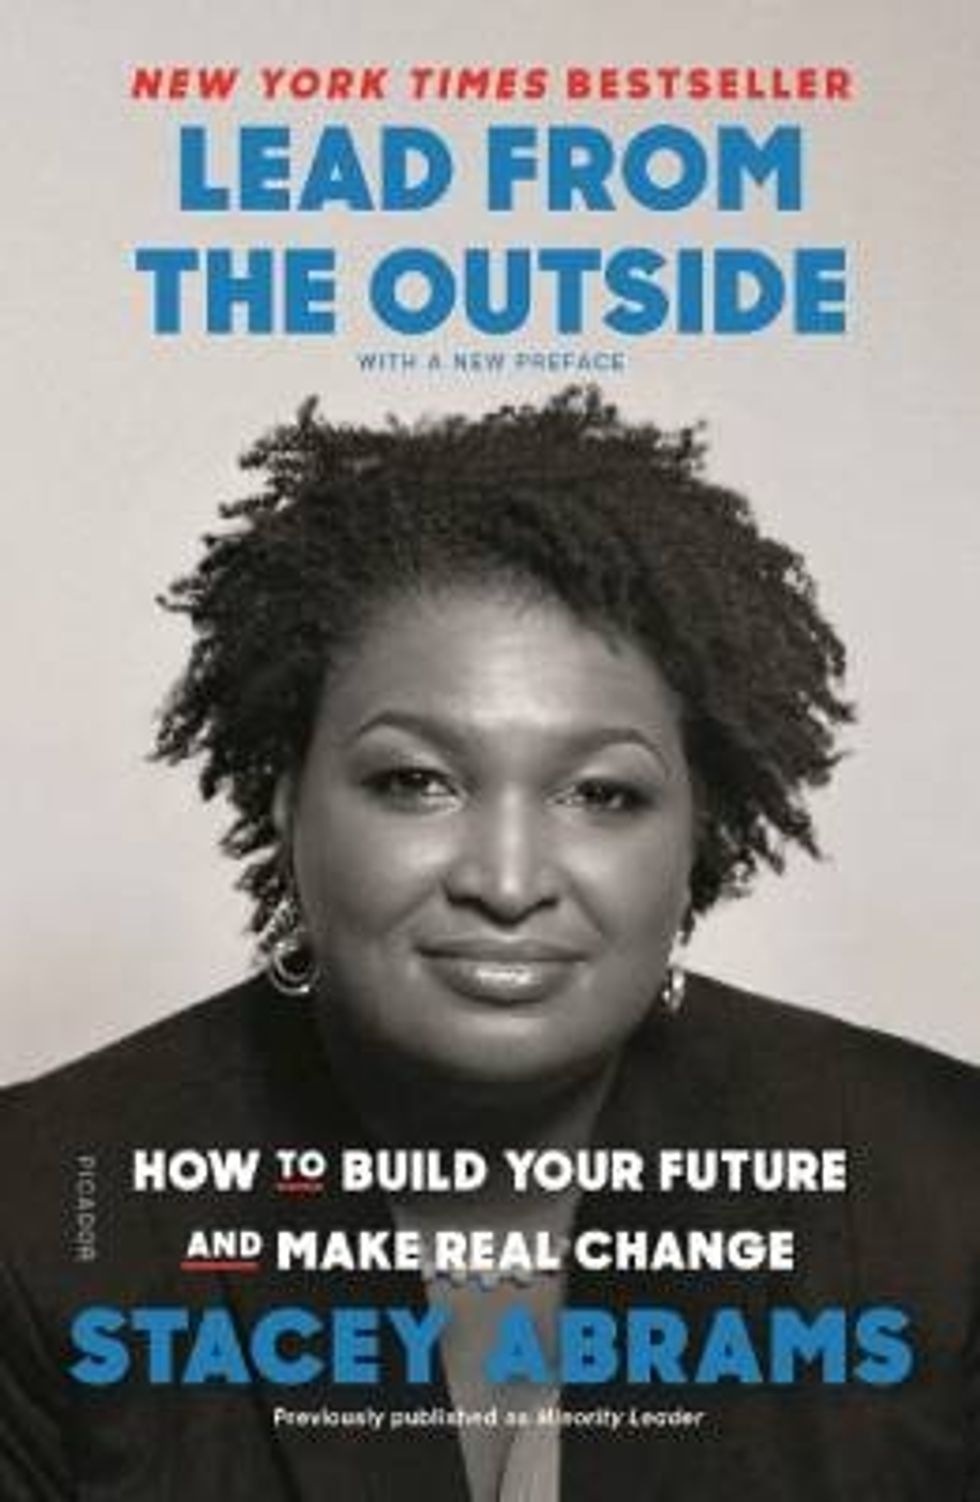 The front cover of the book "Lead From the Outside: How to Build Your Future and Make Real Change" by Stacey Abrams